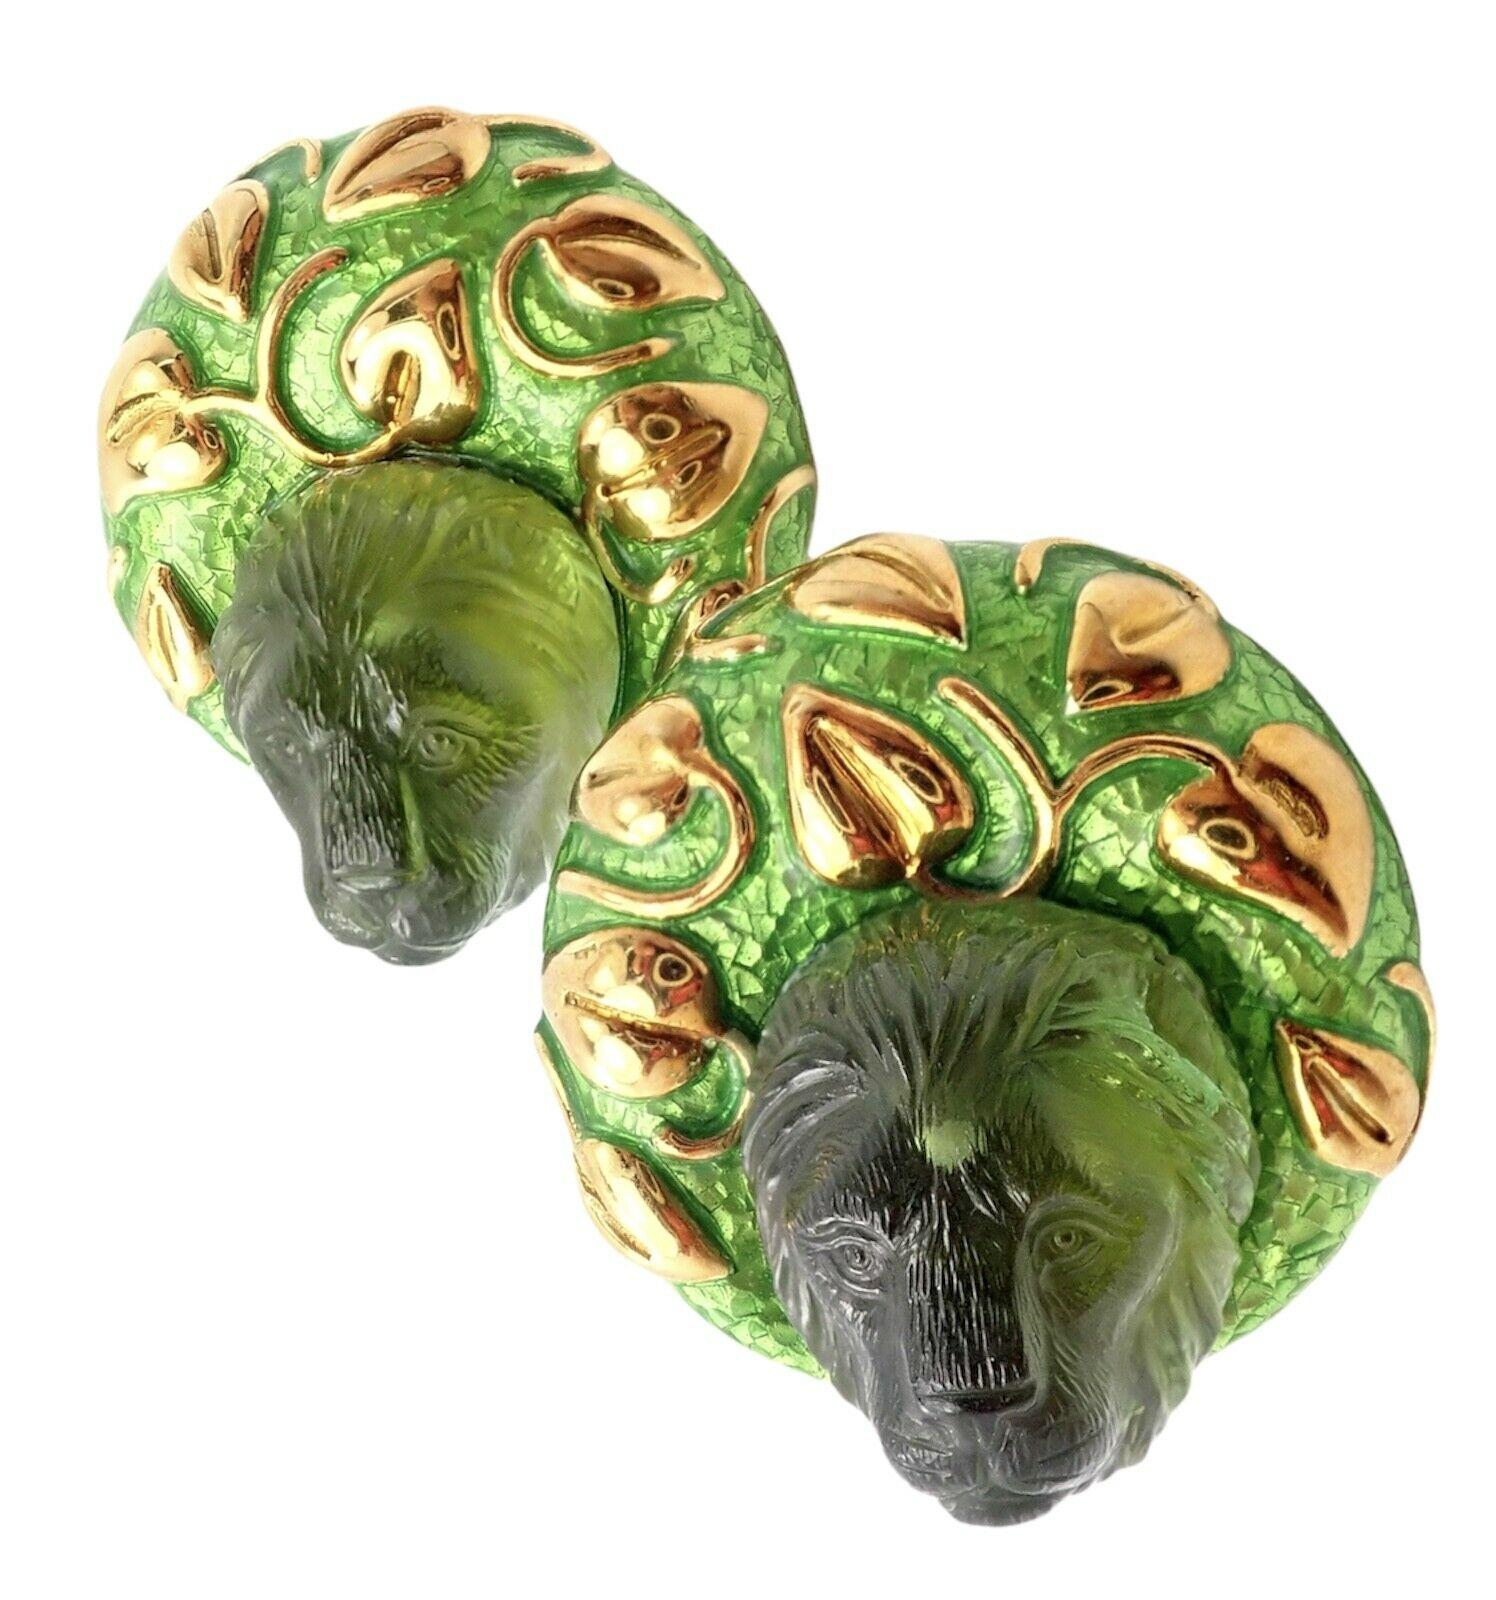 18k Yellow Gold Carved Peridot Green Enamel Lion Earrings by Elizabeth Gage. 
With 2x Peridot: 16mm x 19mm
Details:
Measurements: 29mm x 29mm
Weight:  49.2 grams
Stamped Hallmarks: GAGE 750 and Vintage Stamps
*Free Shipping within the United